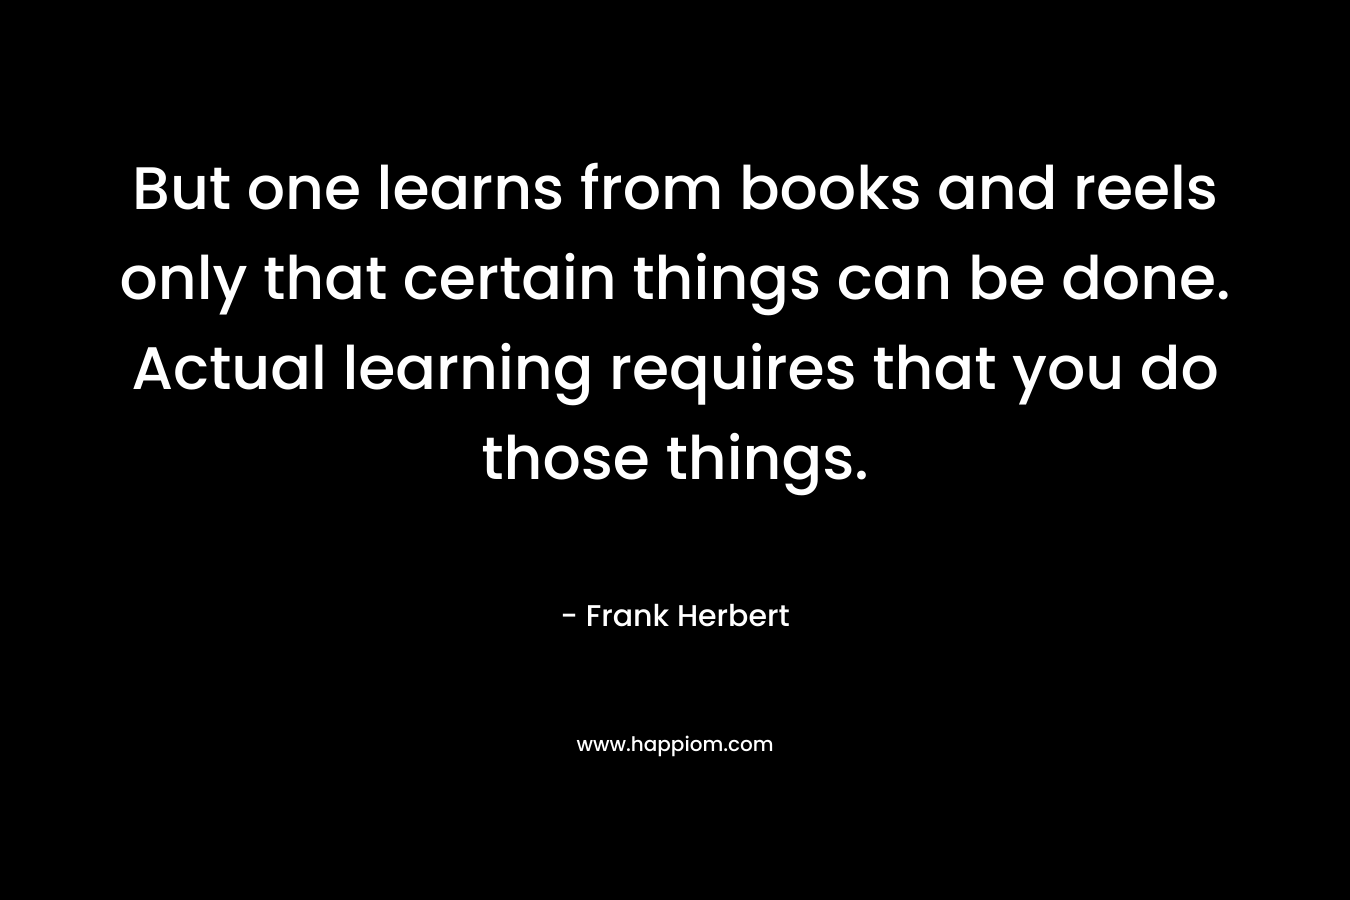 But one learns from books and reels only that certain things can be done. Actual learning requires that you do those things.